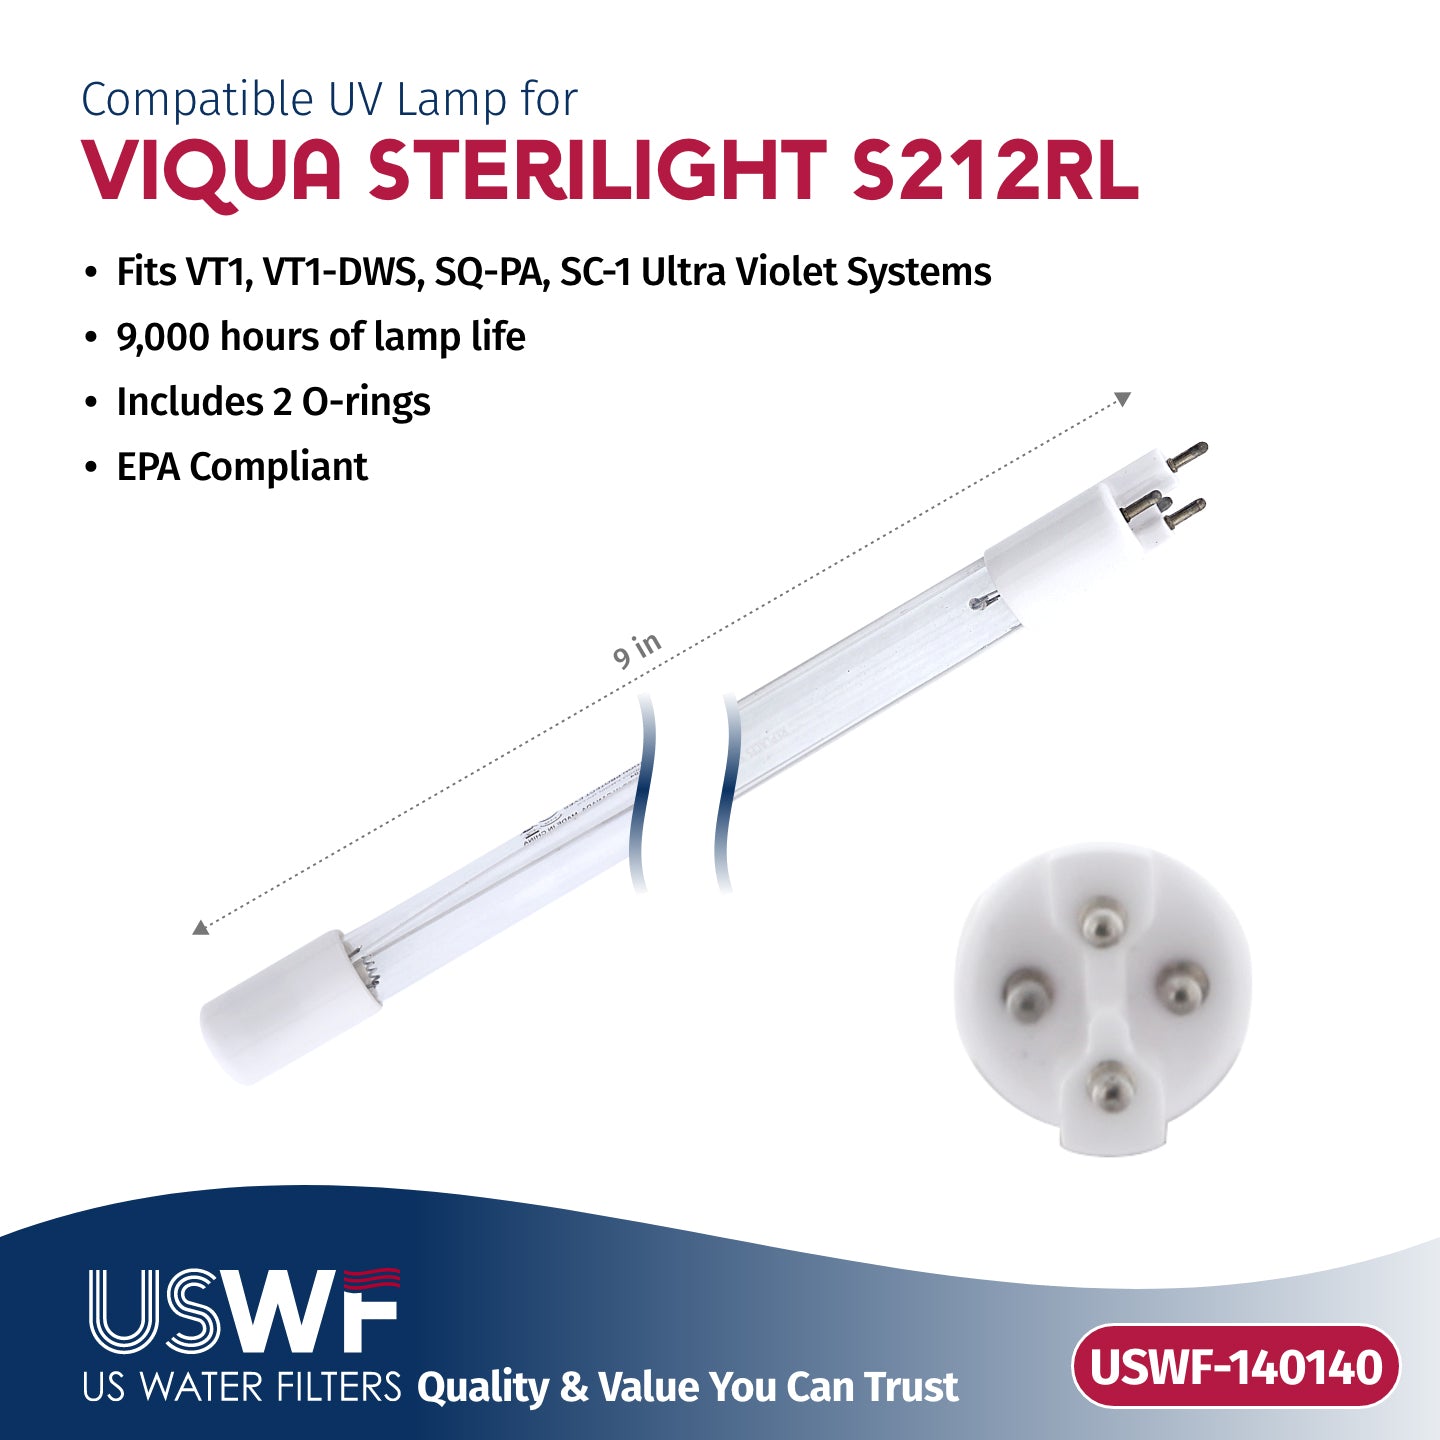 USWF Replacement for S212RL UV Lamp | Fits the VIQUA SQ-PA, SC1, & VT-1 Series UV Systems